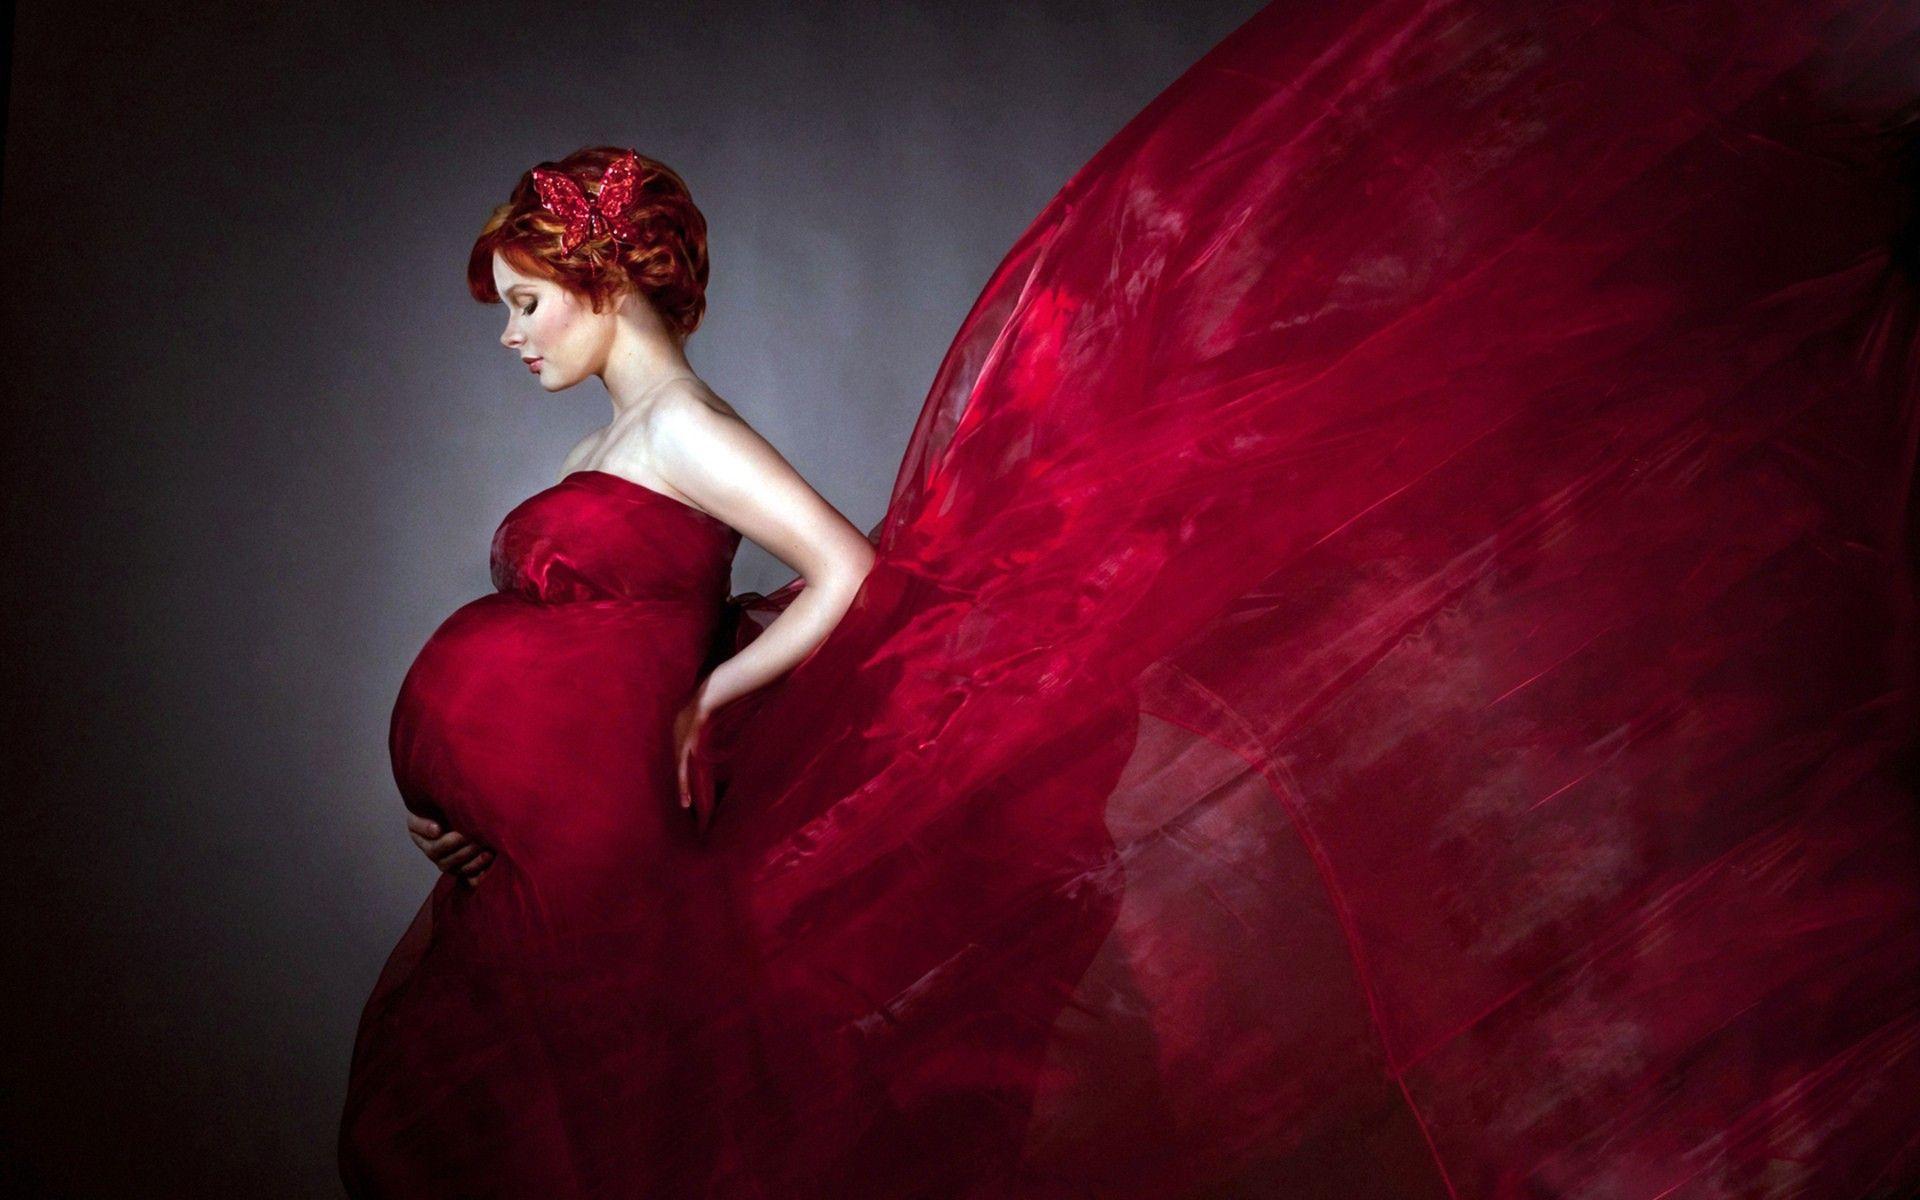 Pregnant Woman in Red Gown Computer Wallpaper, Desktop